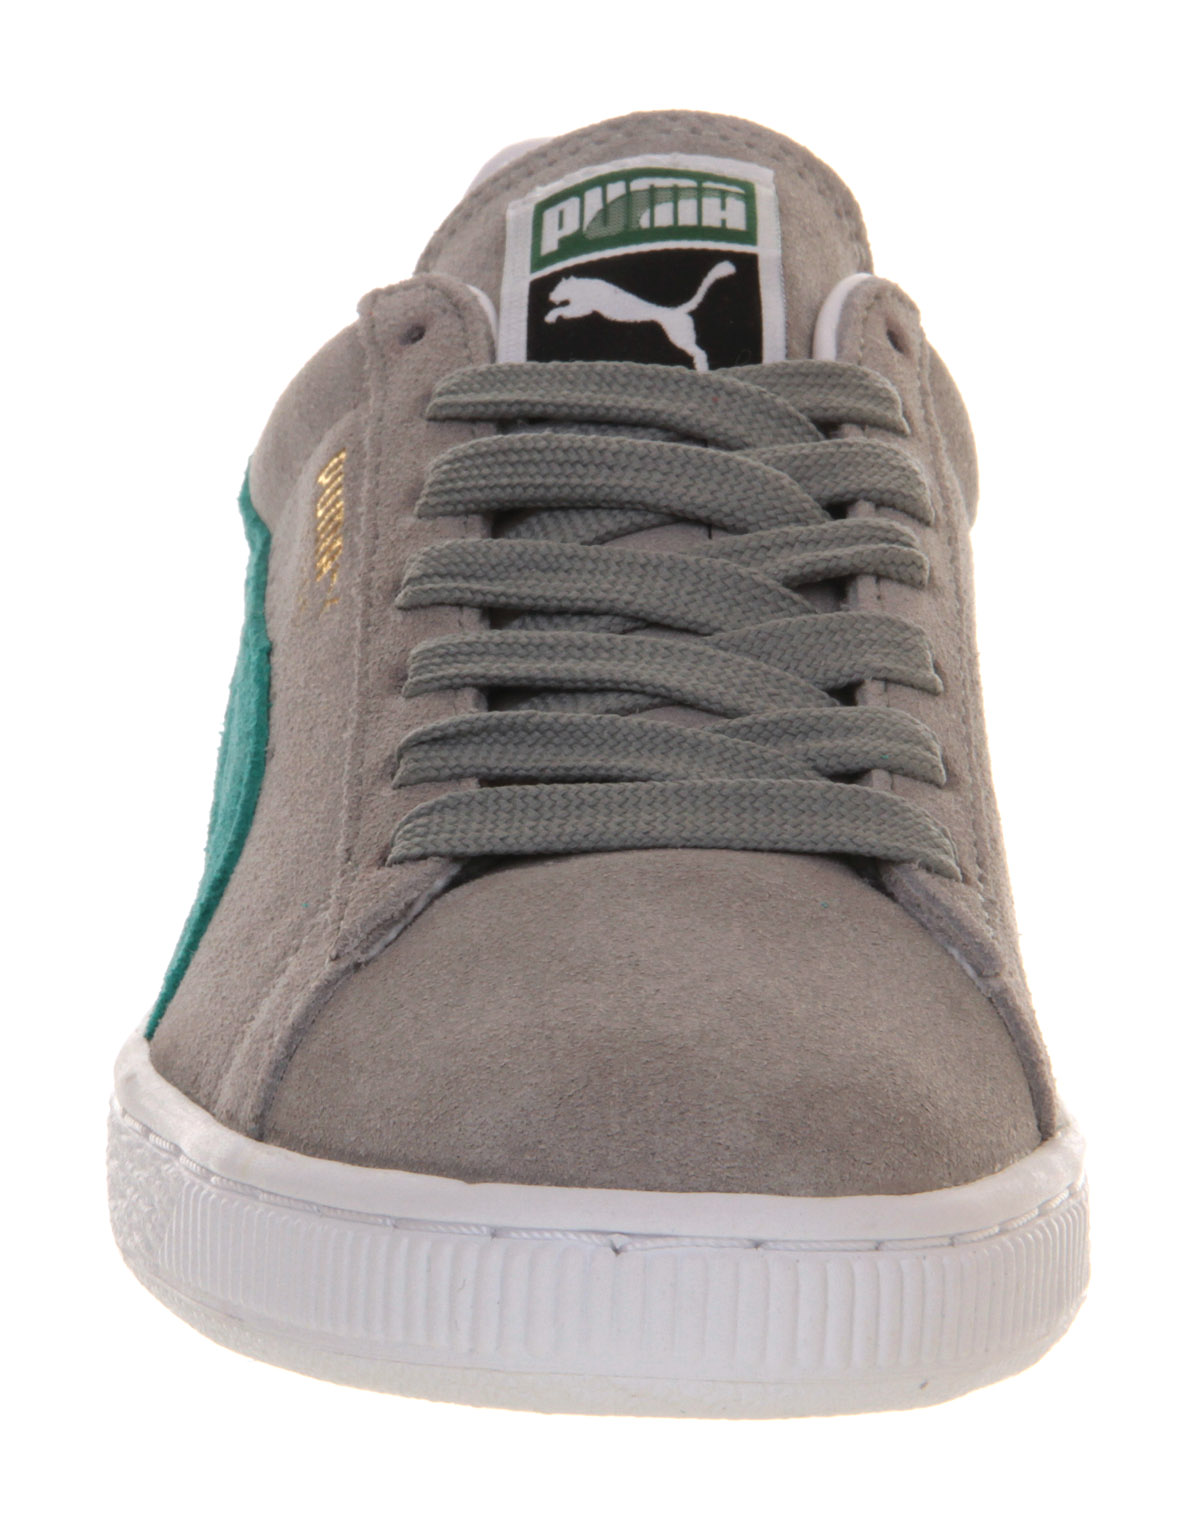 Lyst - Puma Suede Classic in Gray for Men